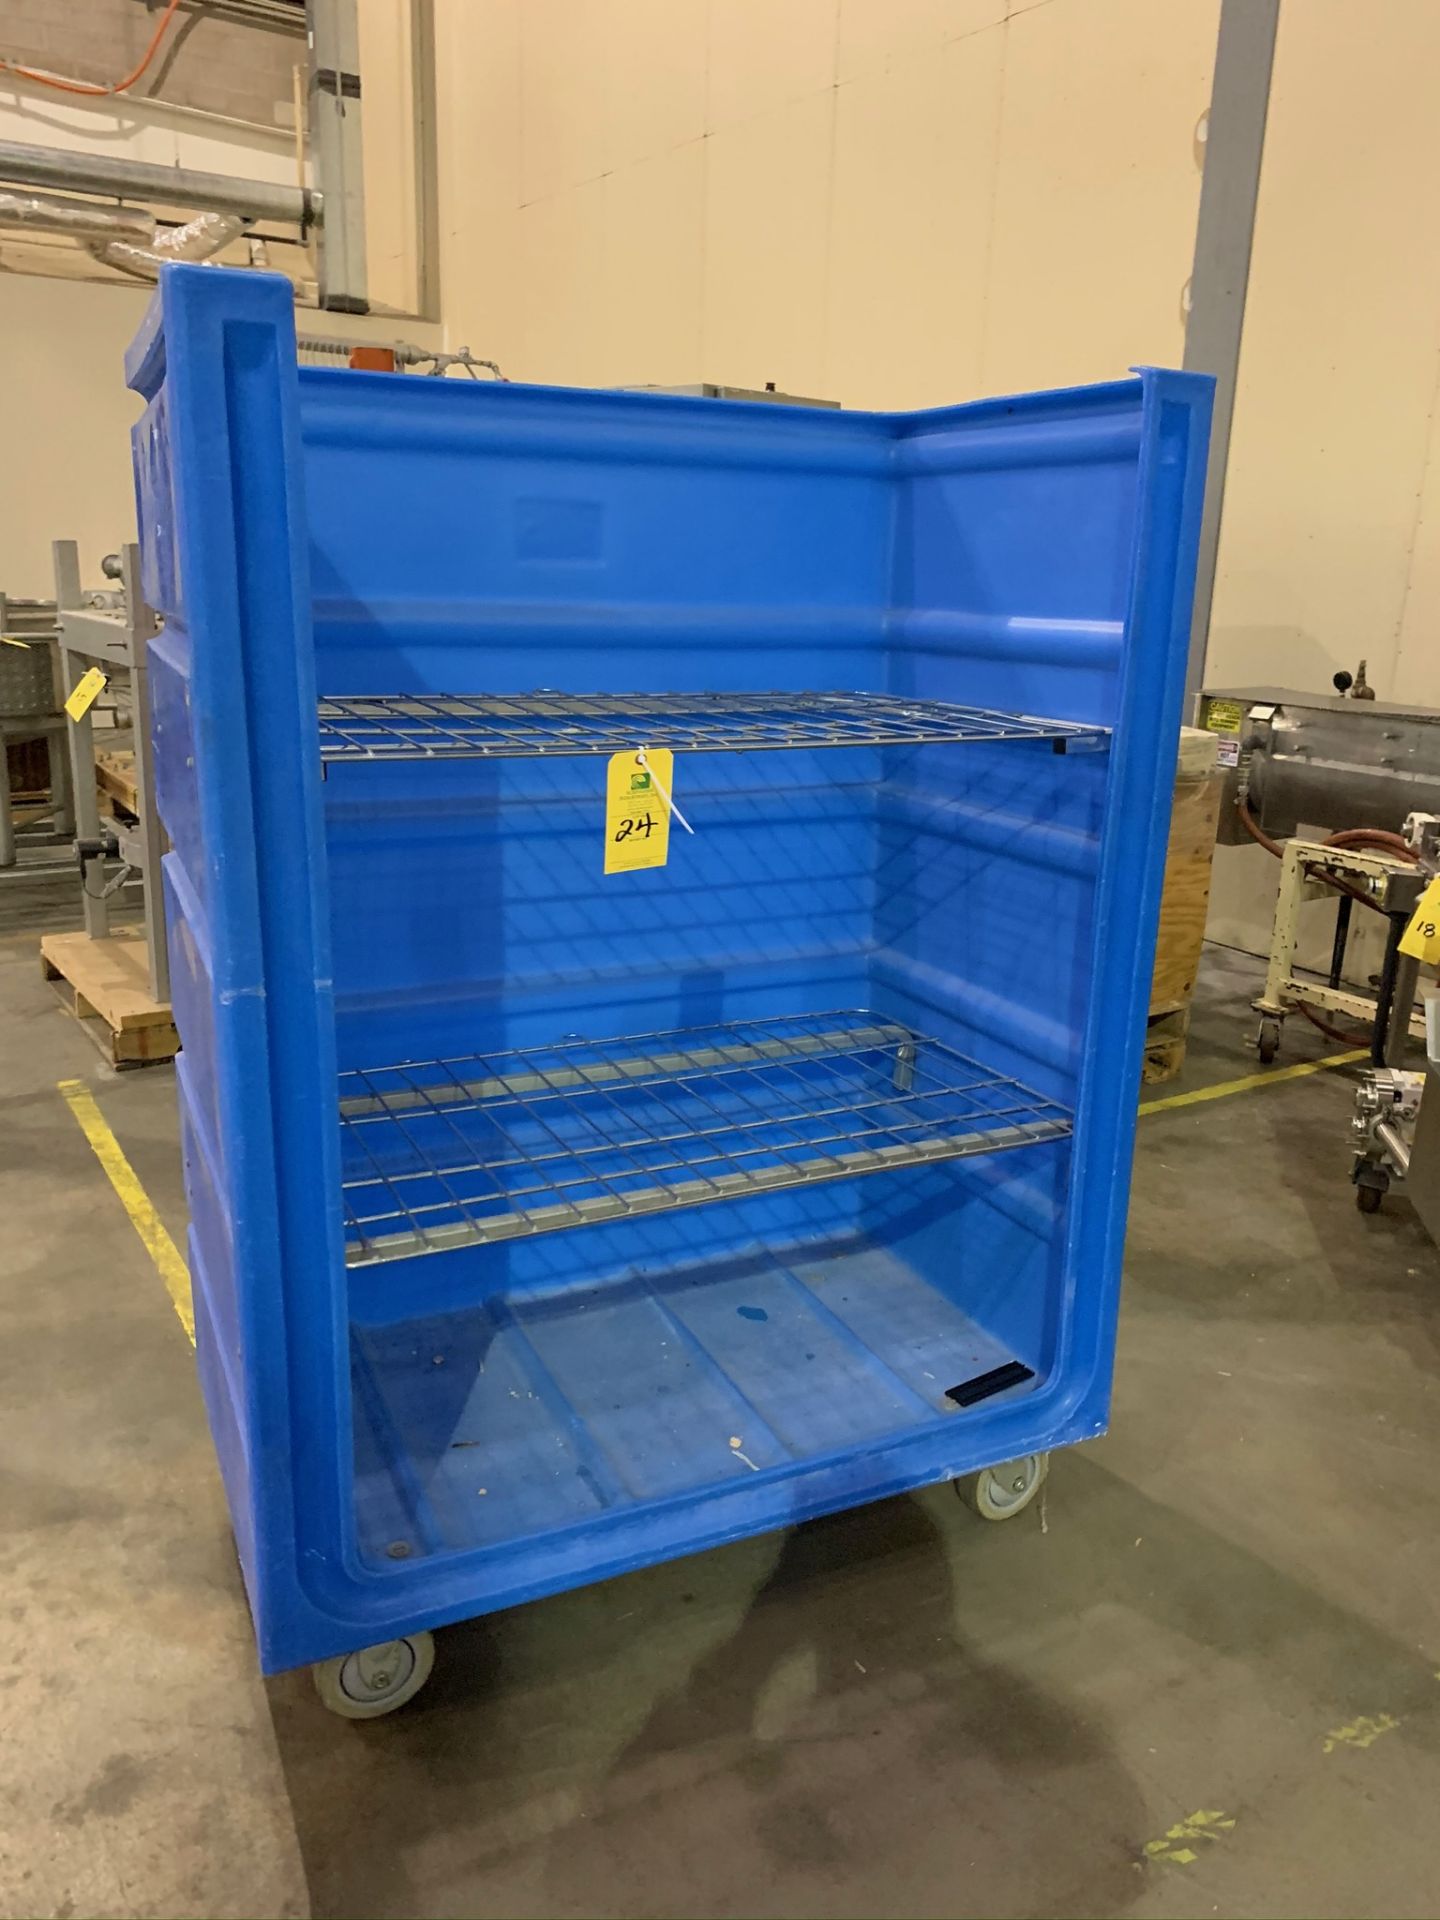 Plastic Portable Product Cart (Rigging Fee - $25)